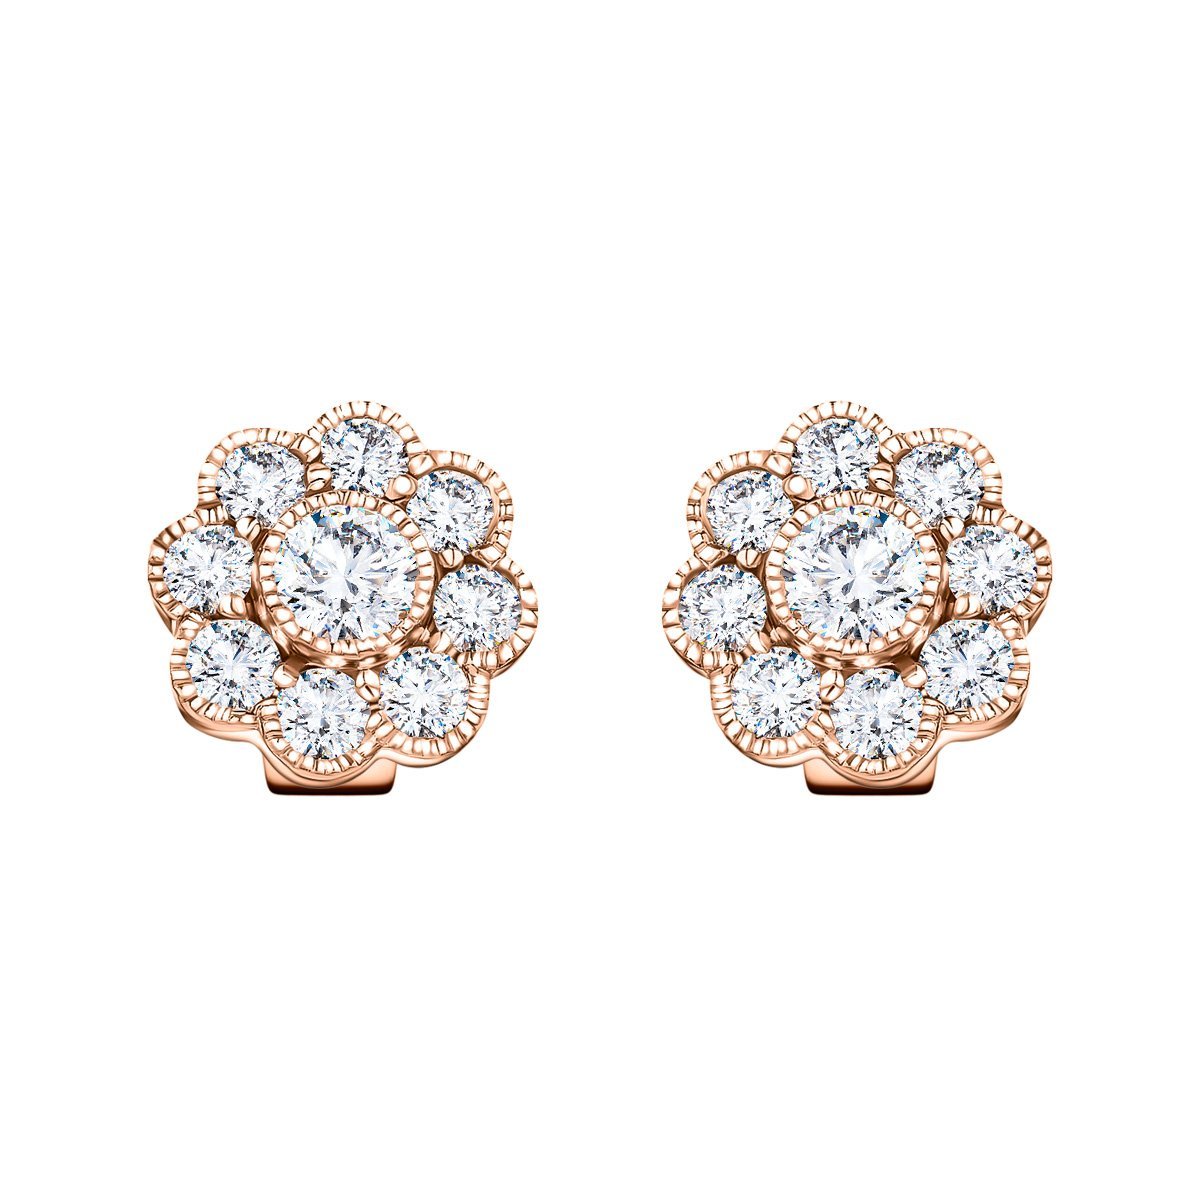 Cluster Earrings 1.10ct G/SI Quality Diamond in 18k Rose Gold - All Diamond